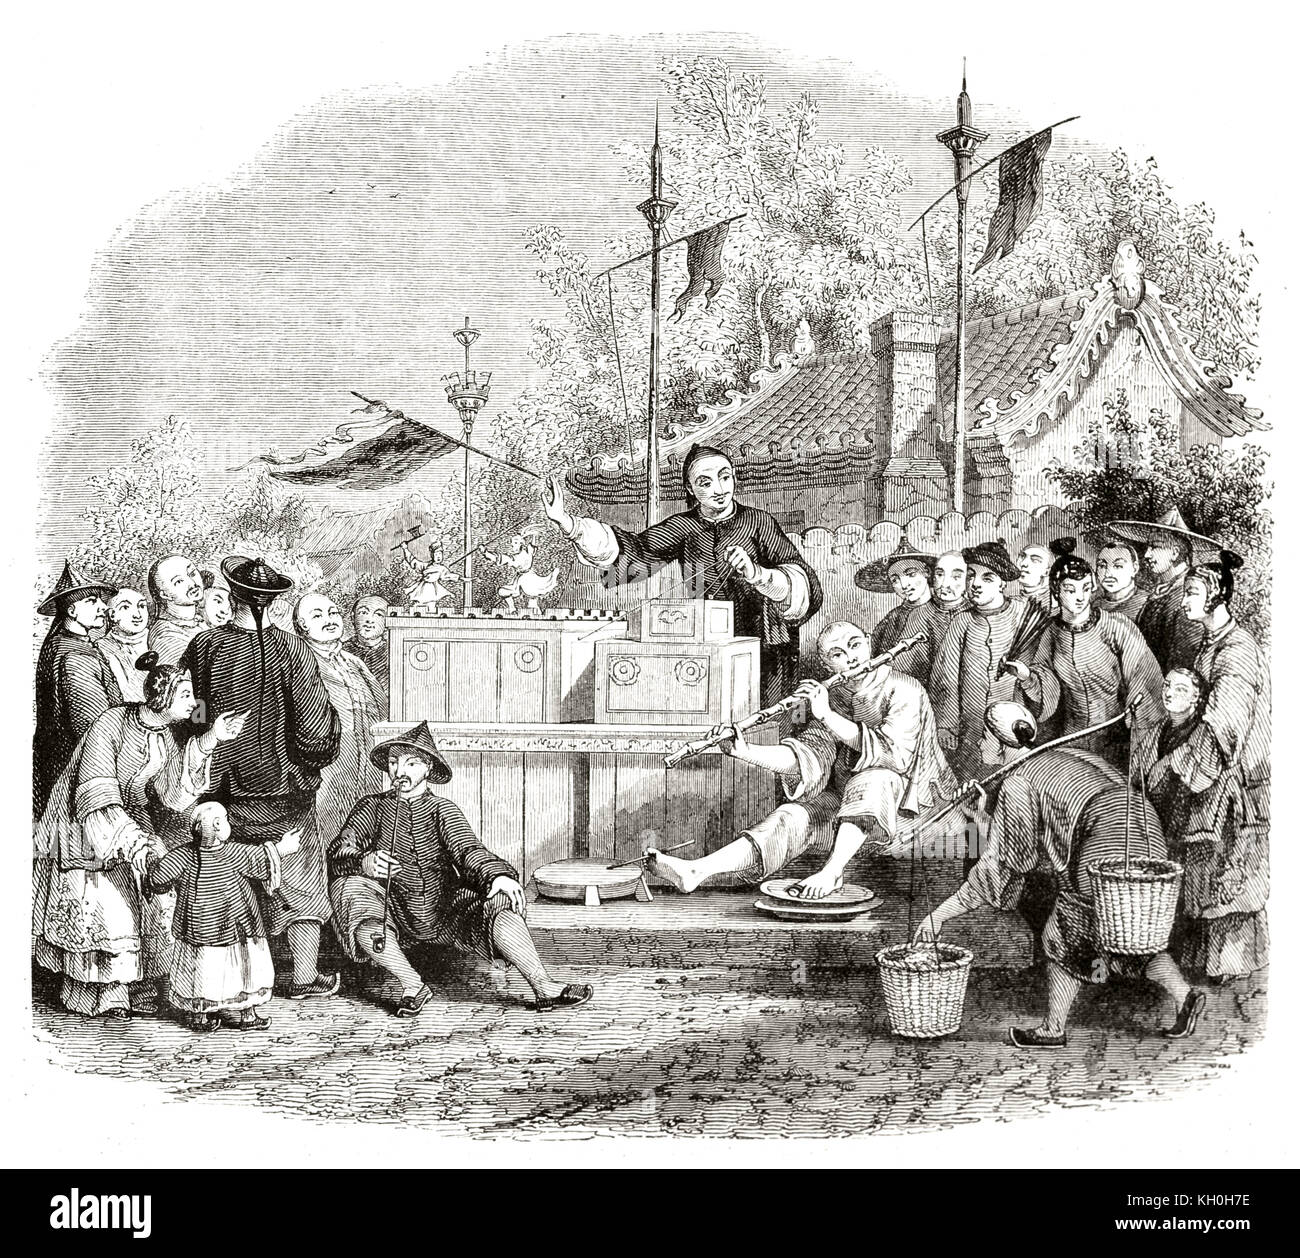 Old illustration of Chinese puppets itinerant theater. By Freeman, publ. on Magasin Pittoresque, Paris, 1847 Stock Photo